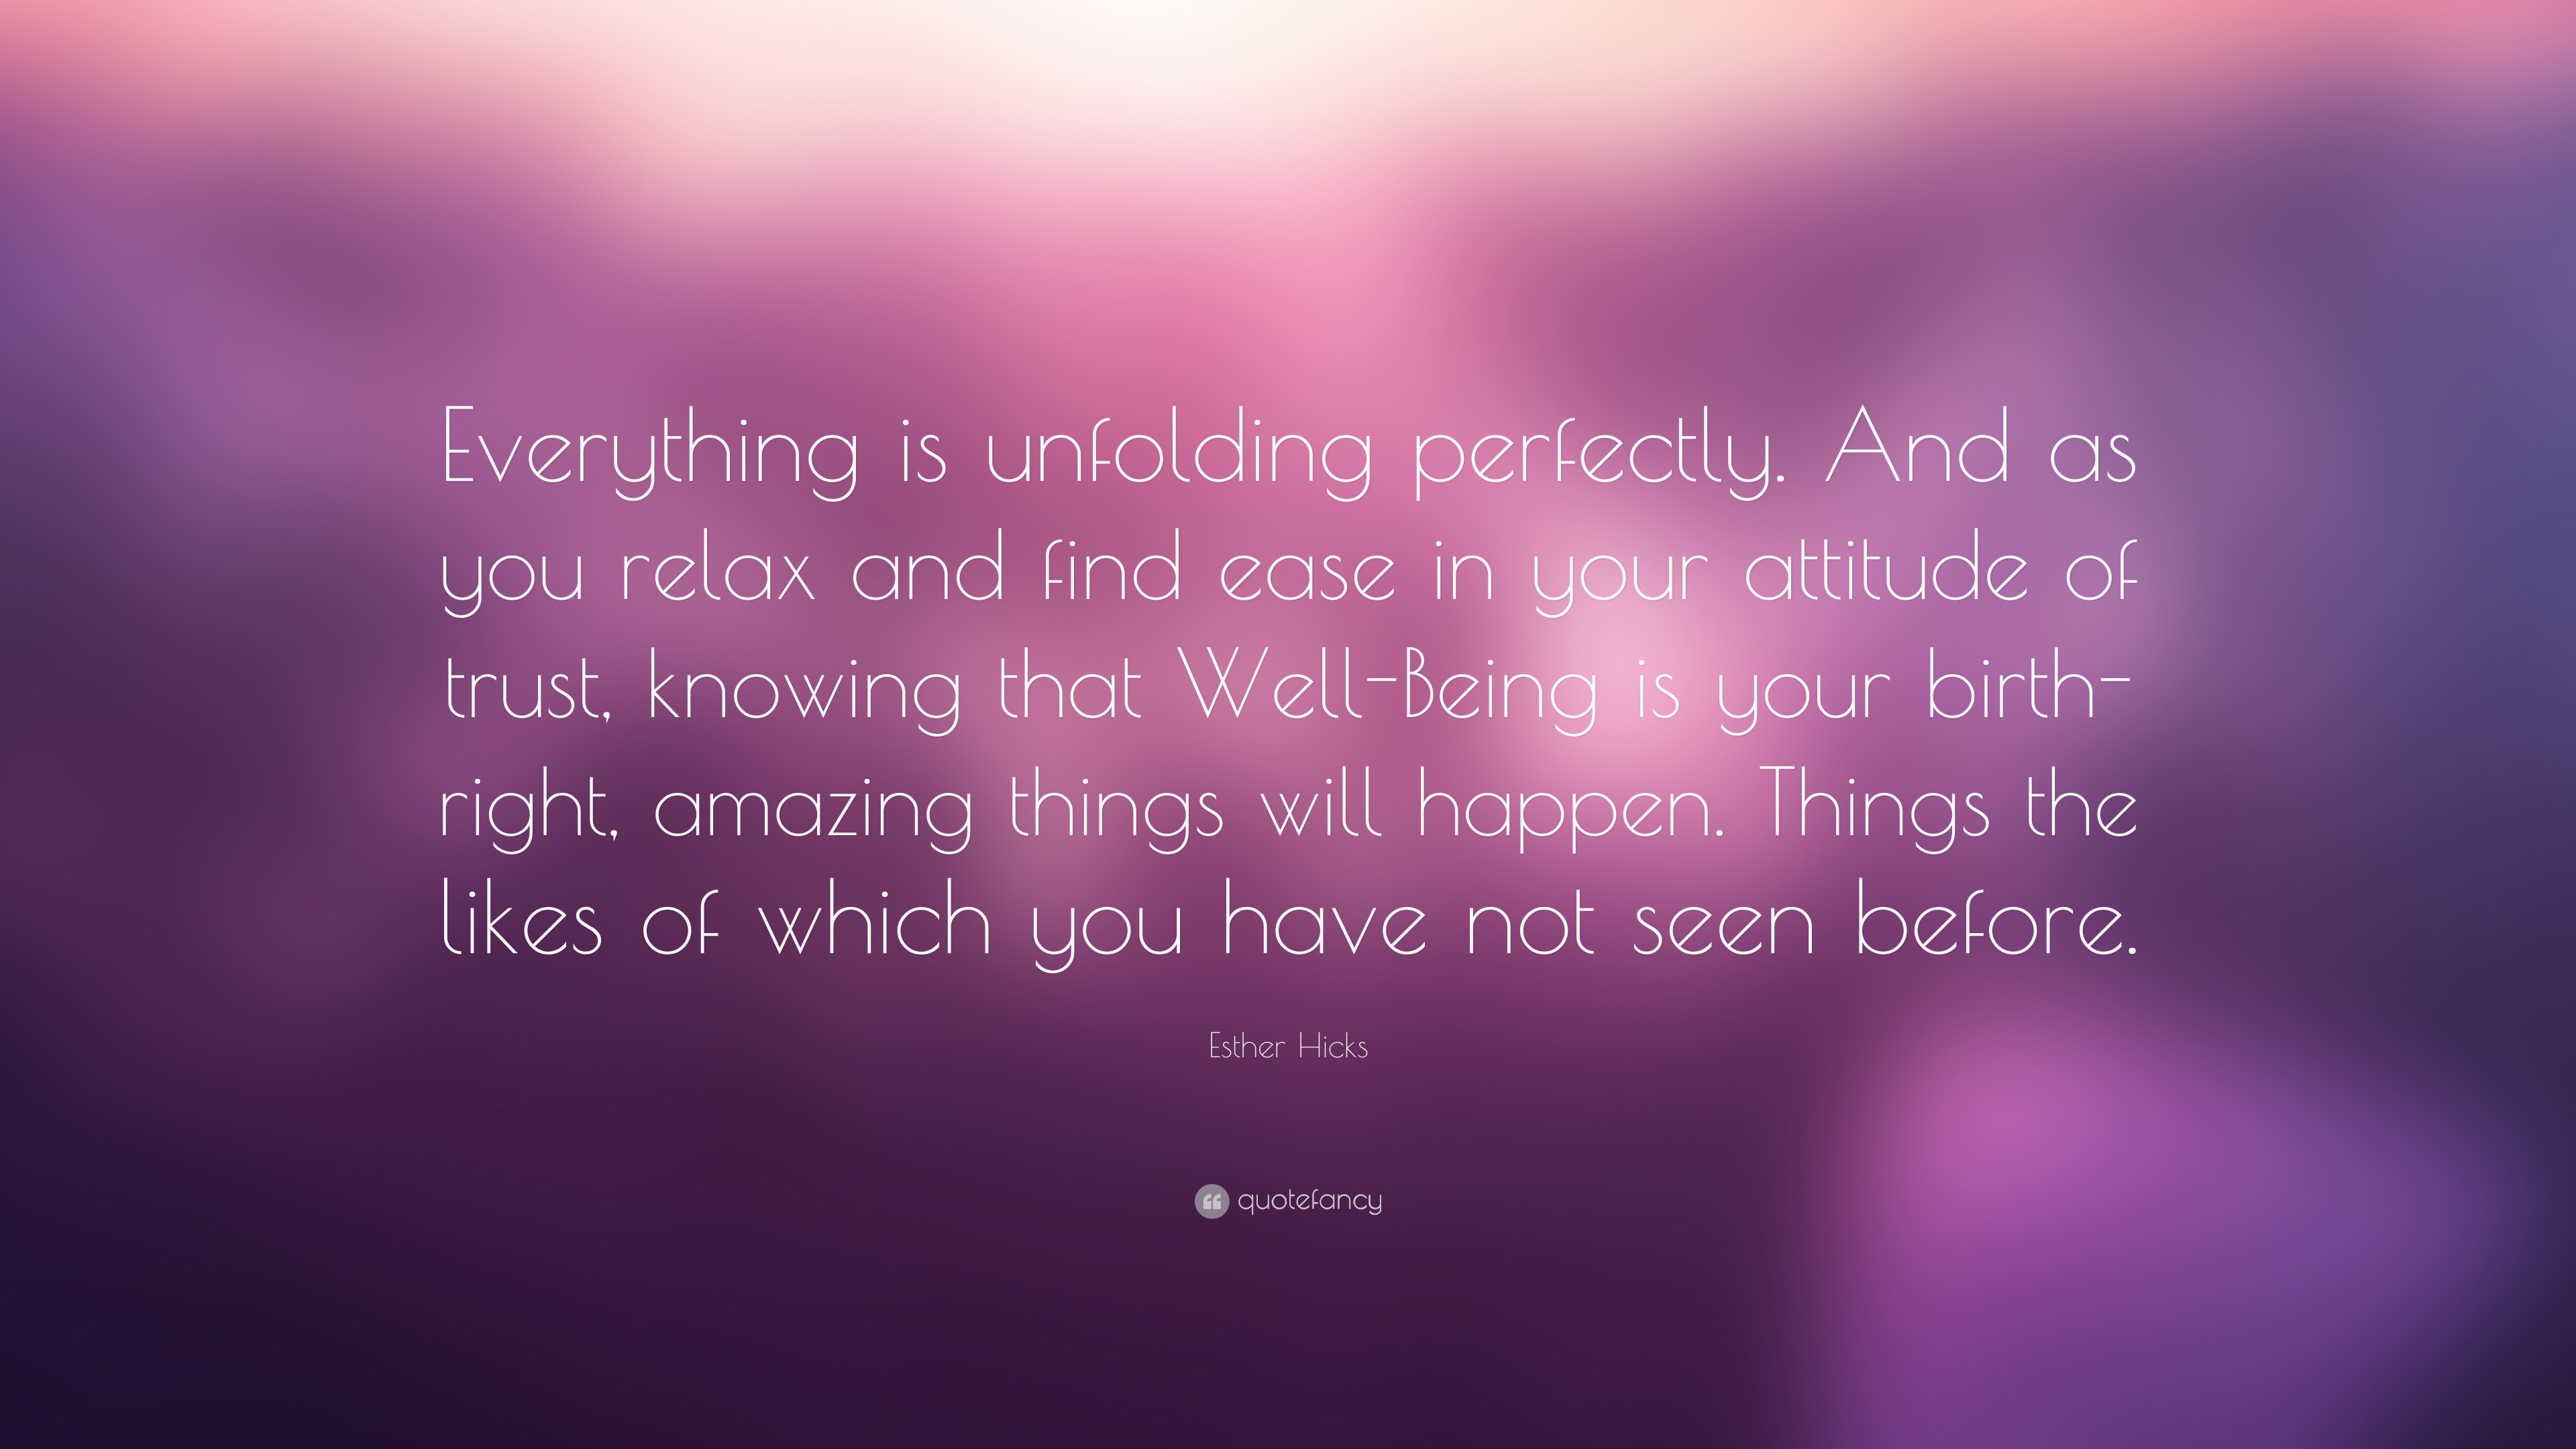 Esther Hicks Quote: “Everything is unfolding perfectly. And as you